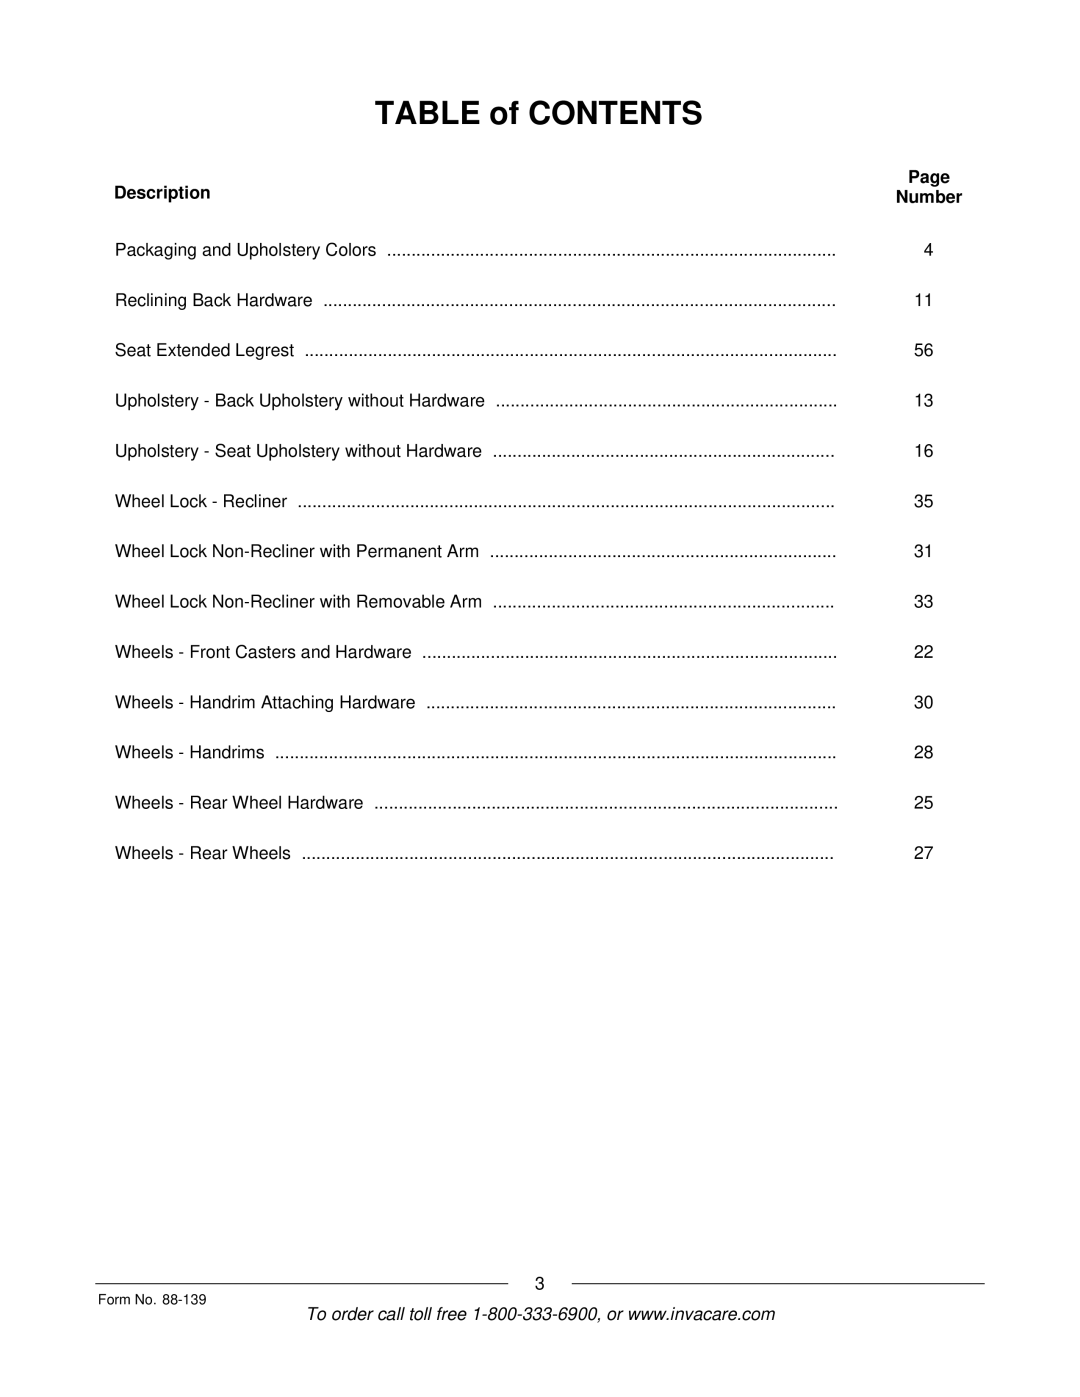 Invacare 3000 manual Table of Contents 